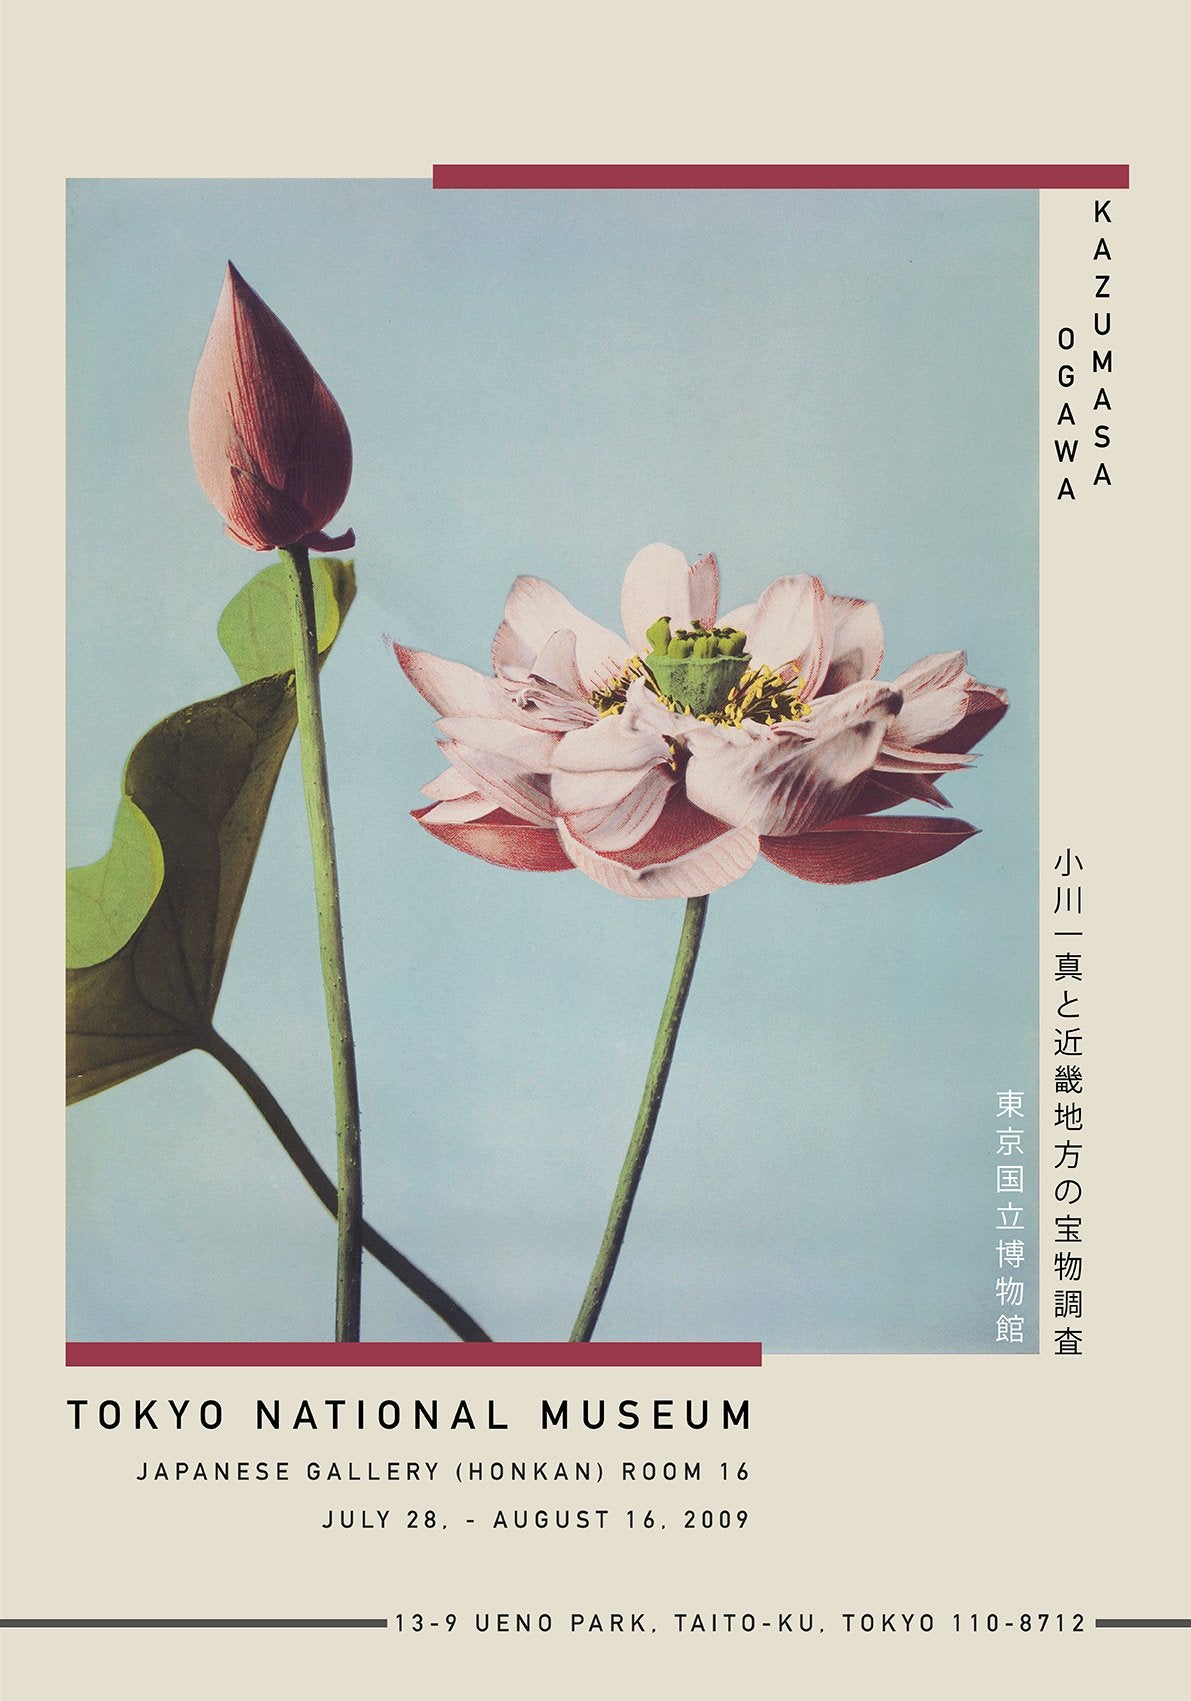 Lotus Flower by Kazumasa Exhibition Poster